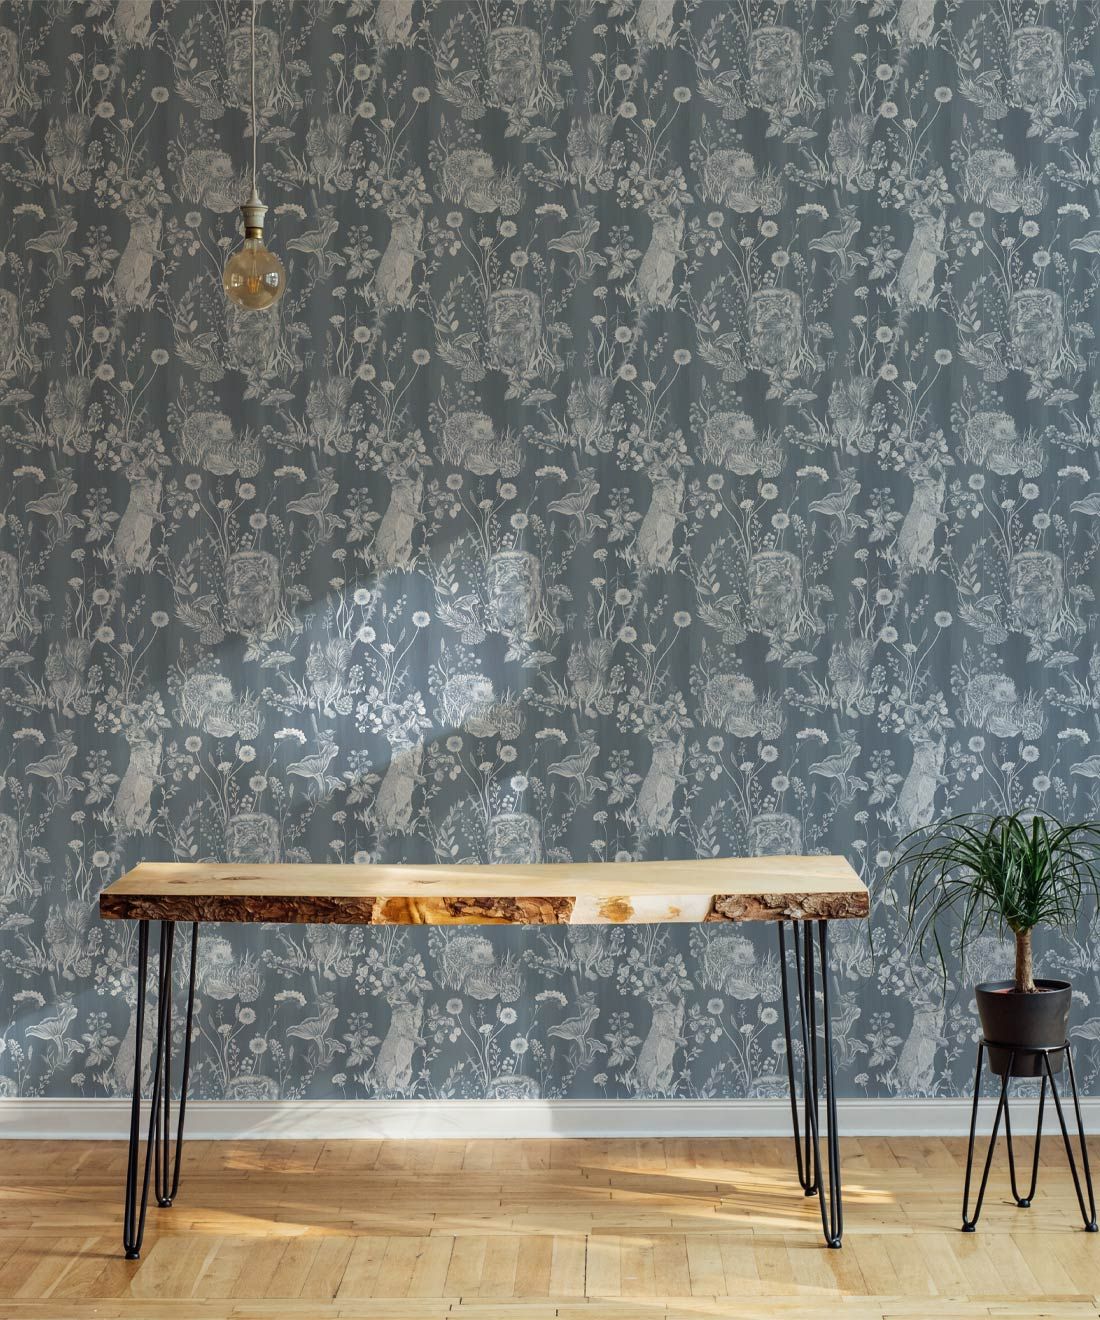 Woodland Friends Wallpaper • Forest Wallpaper with rabbits, hares, raccoons • Iryna Ruggeri • Arctic • Insitu